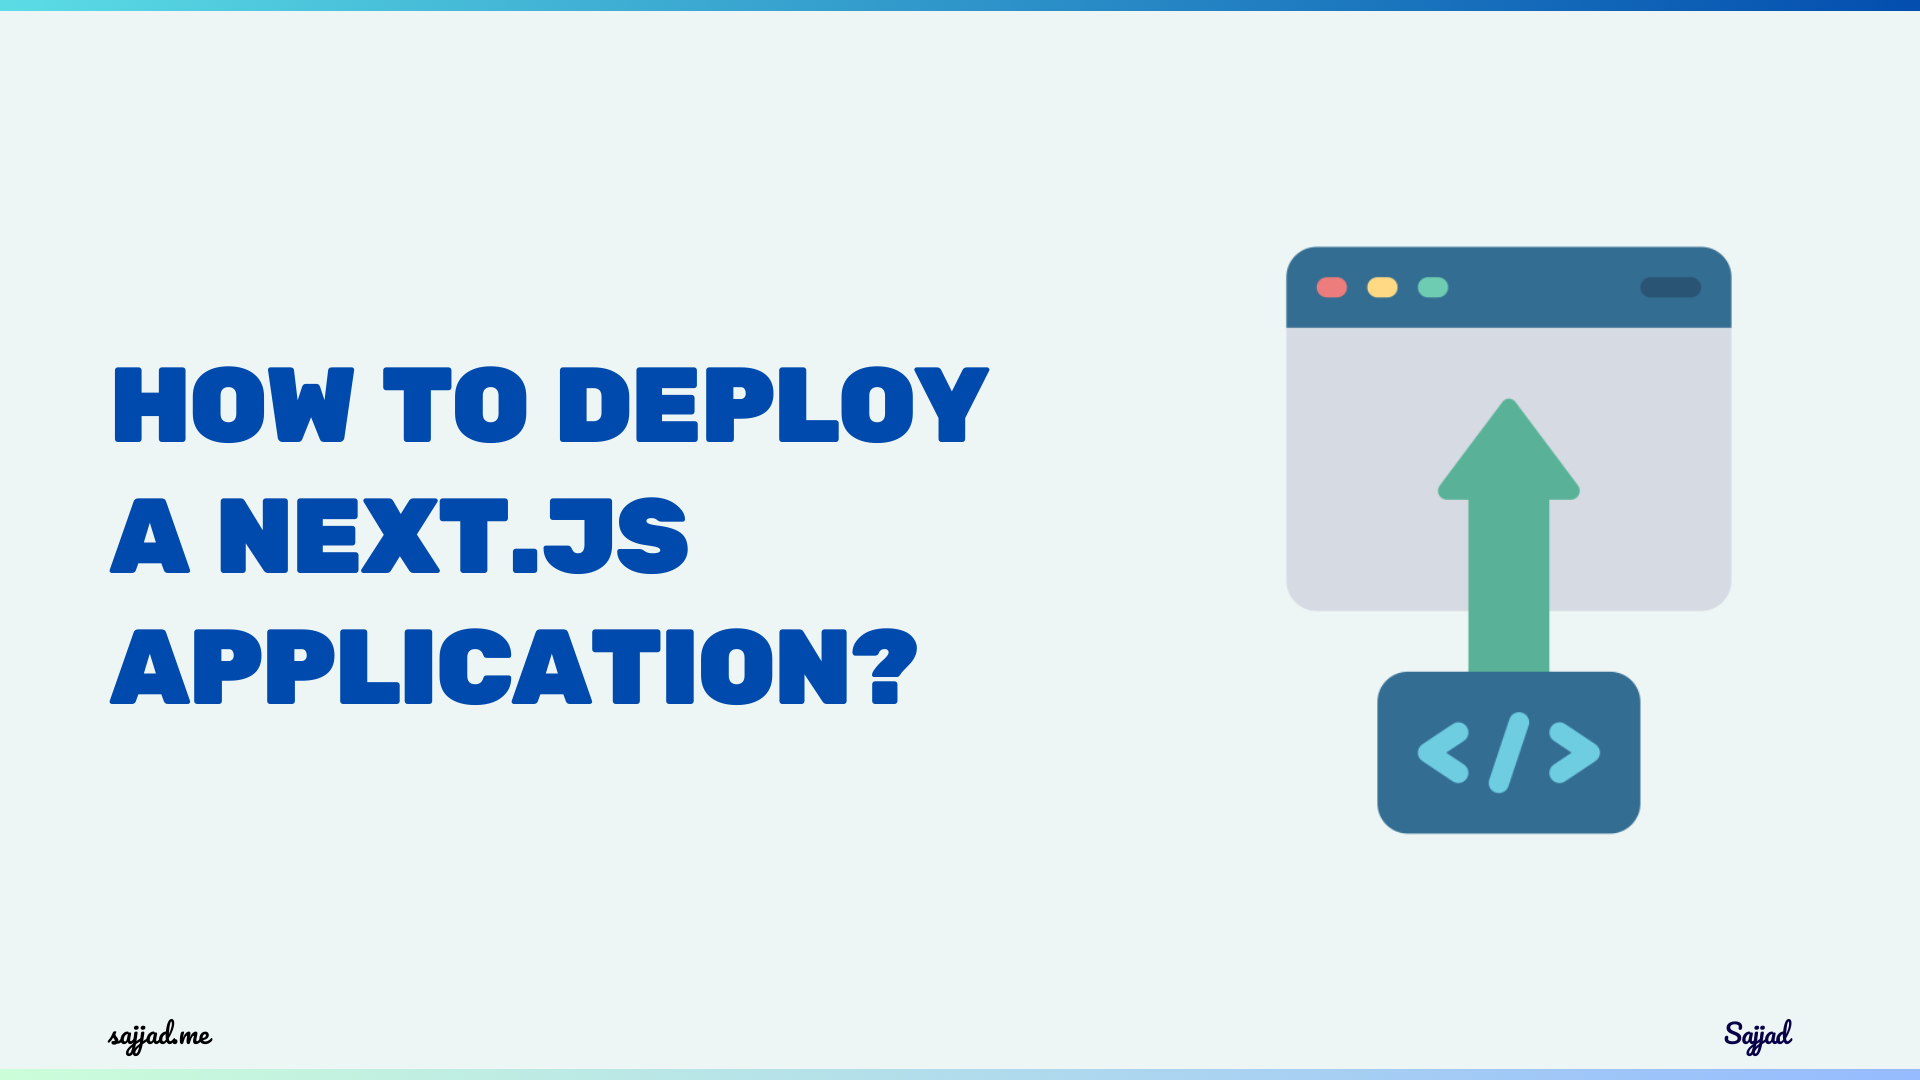 How to deploy a Next.js application?